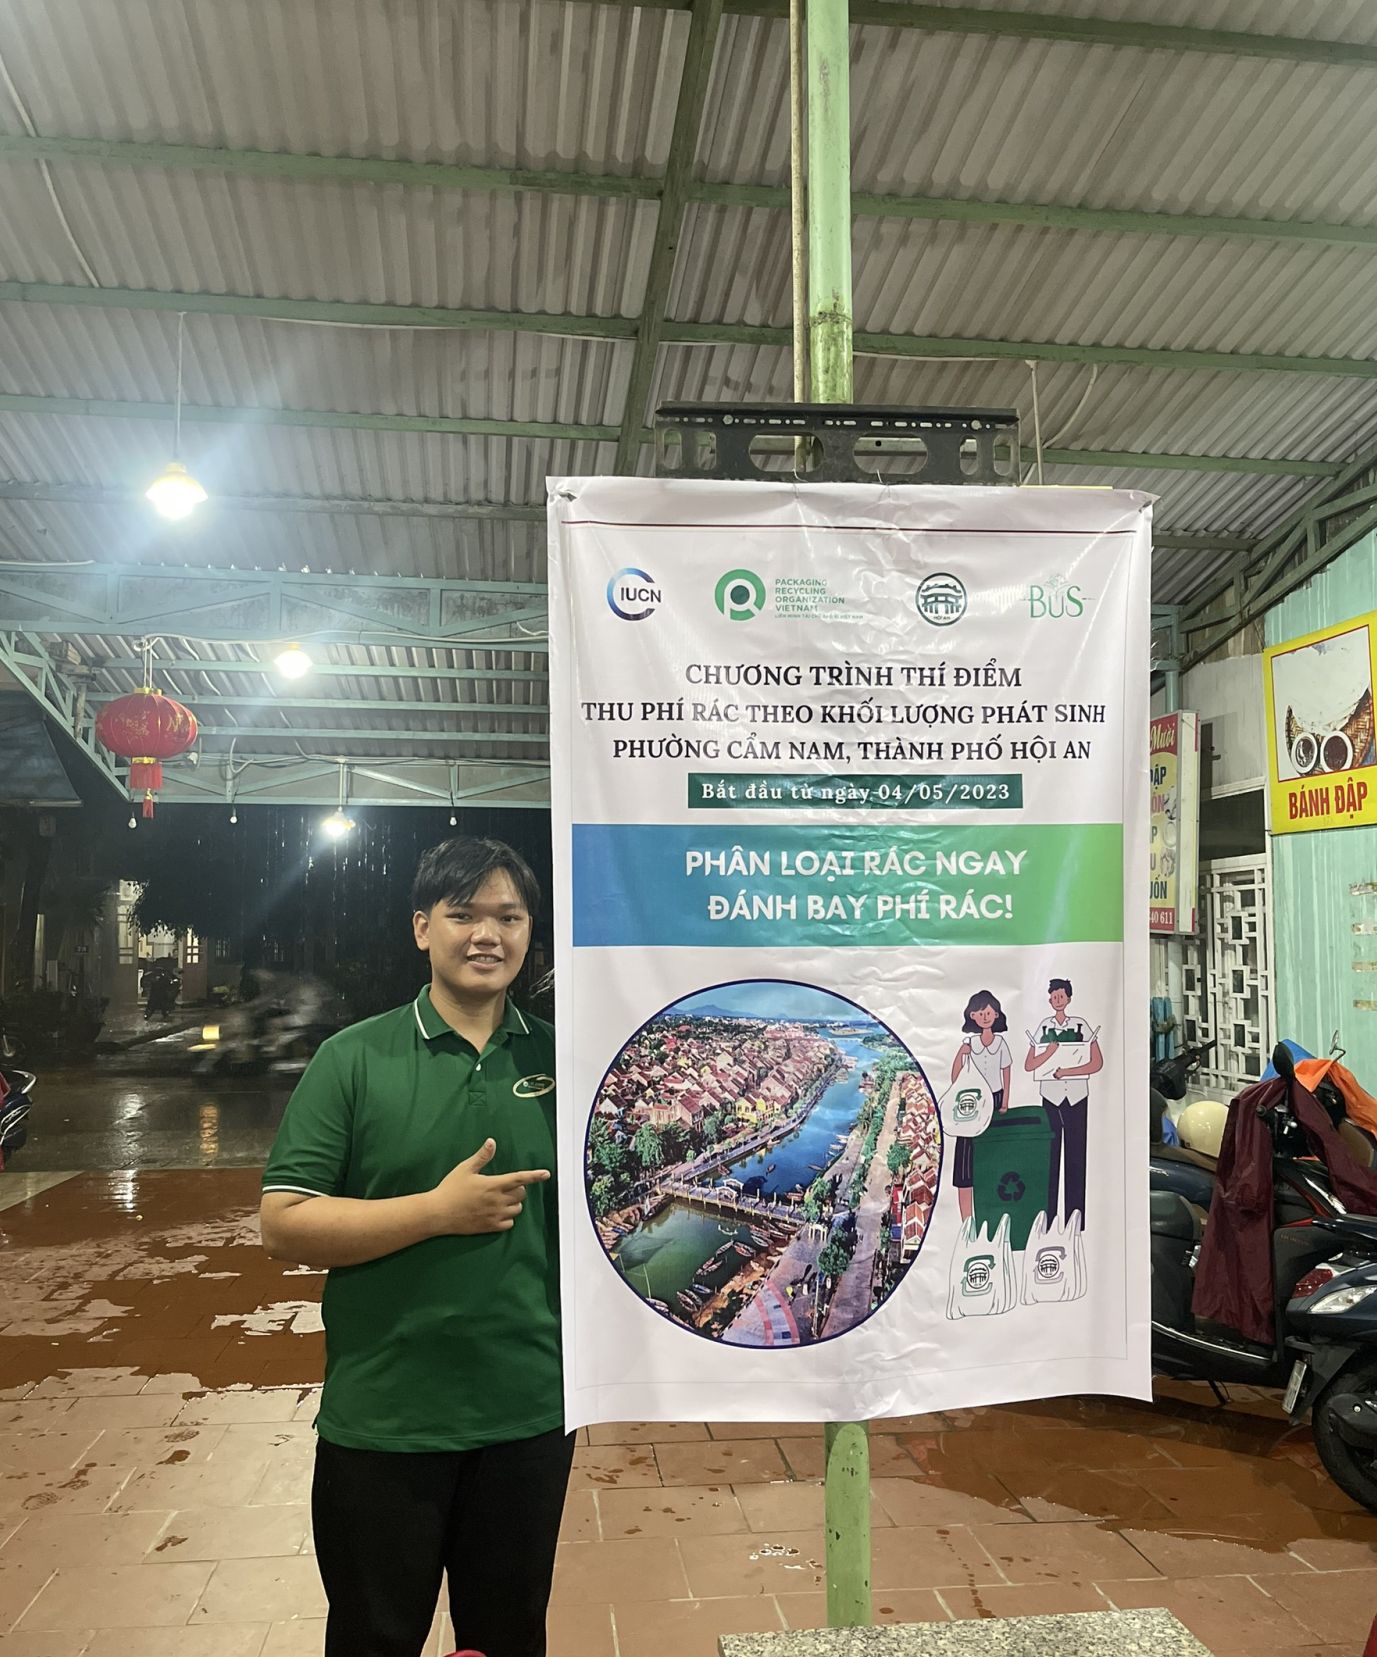 A communications poster of VBWF in Cam Nam, Hoi An 